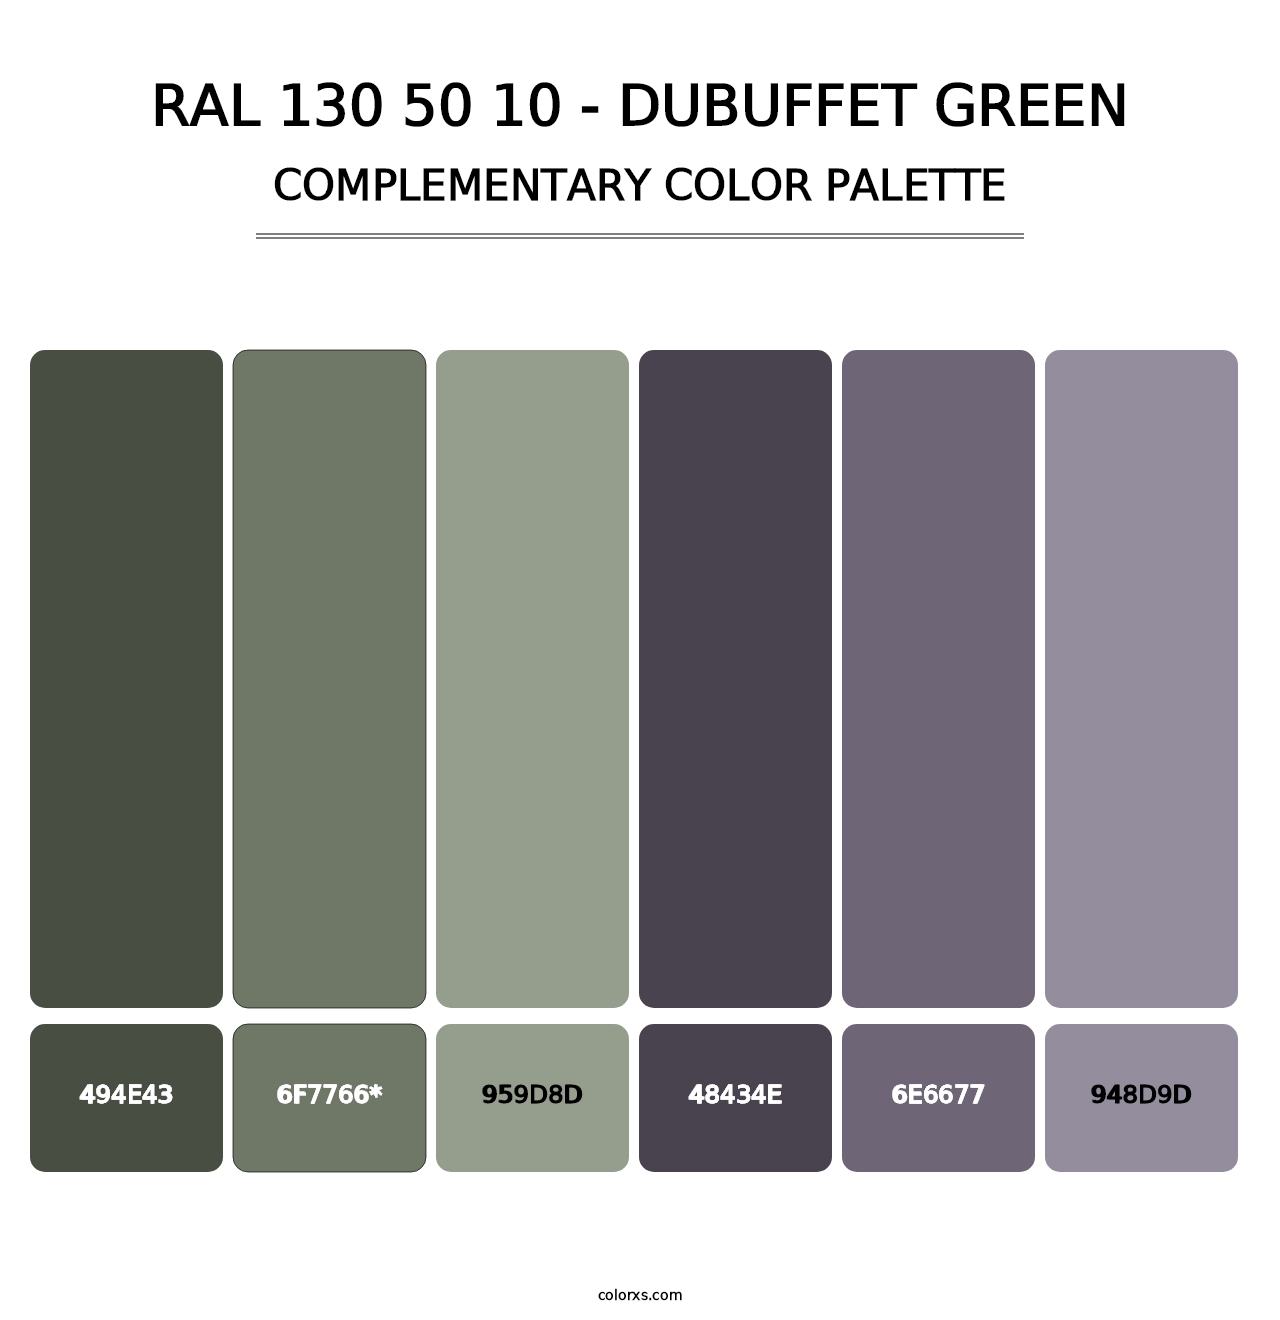 RAL 130 50 10 - Dubuffet Green - Complementary Color Palette